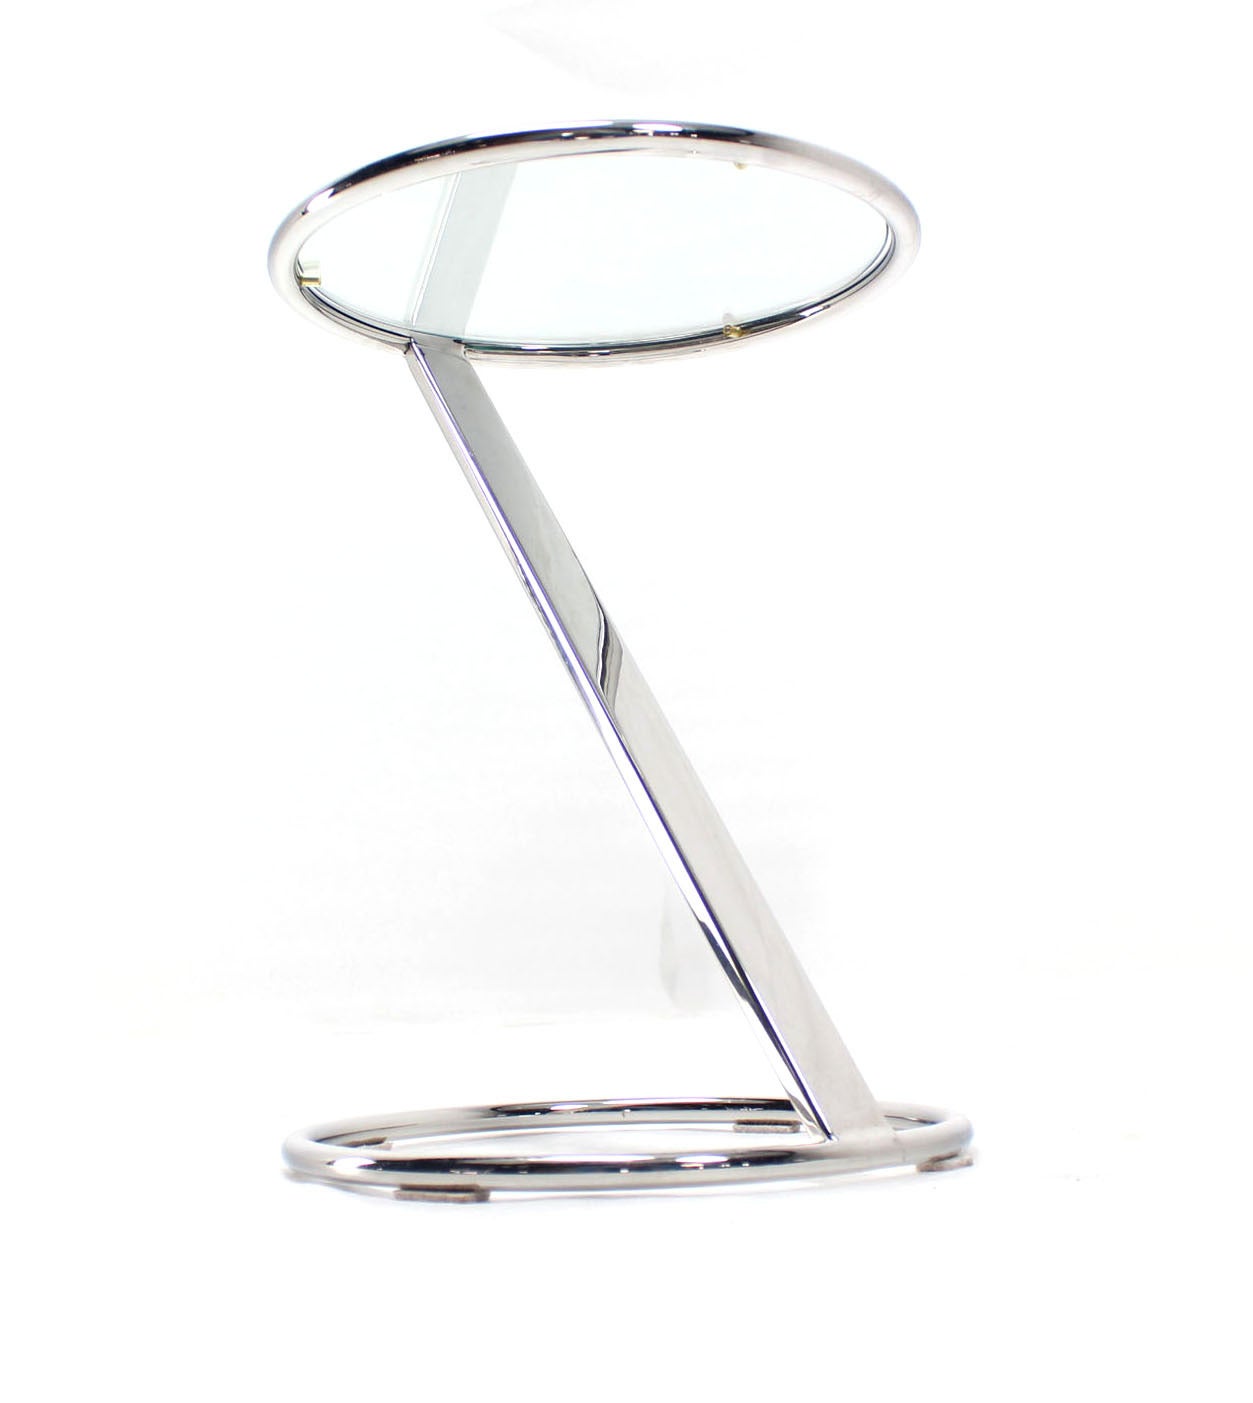 American Chrome and Glass Mid-Century Modern Z-Shape End Table Stand